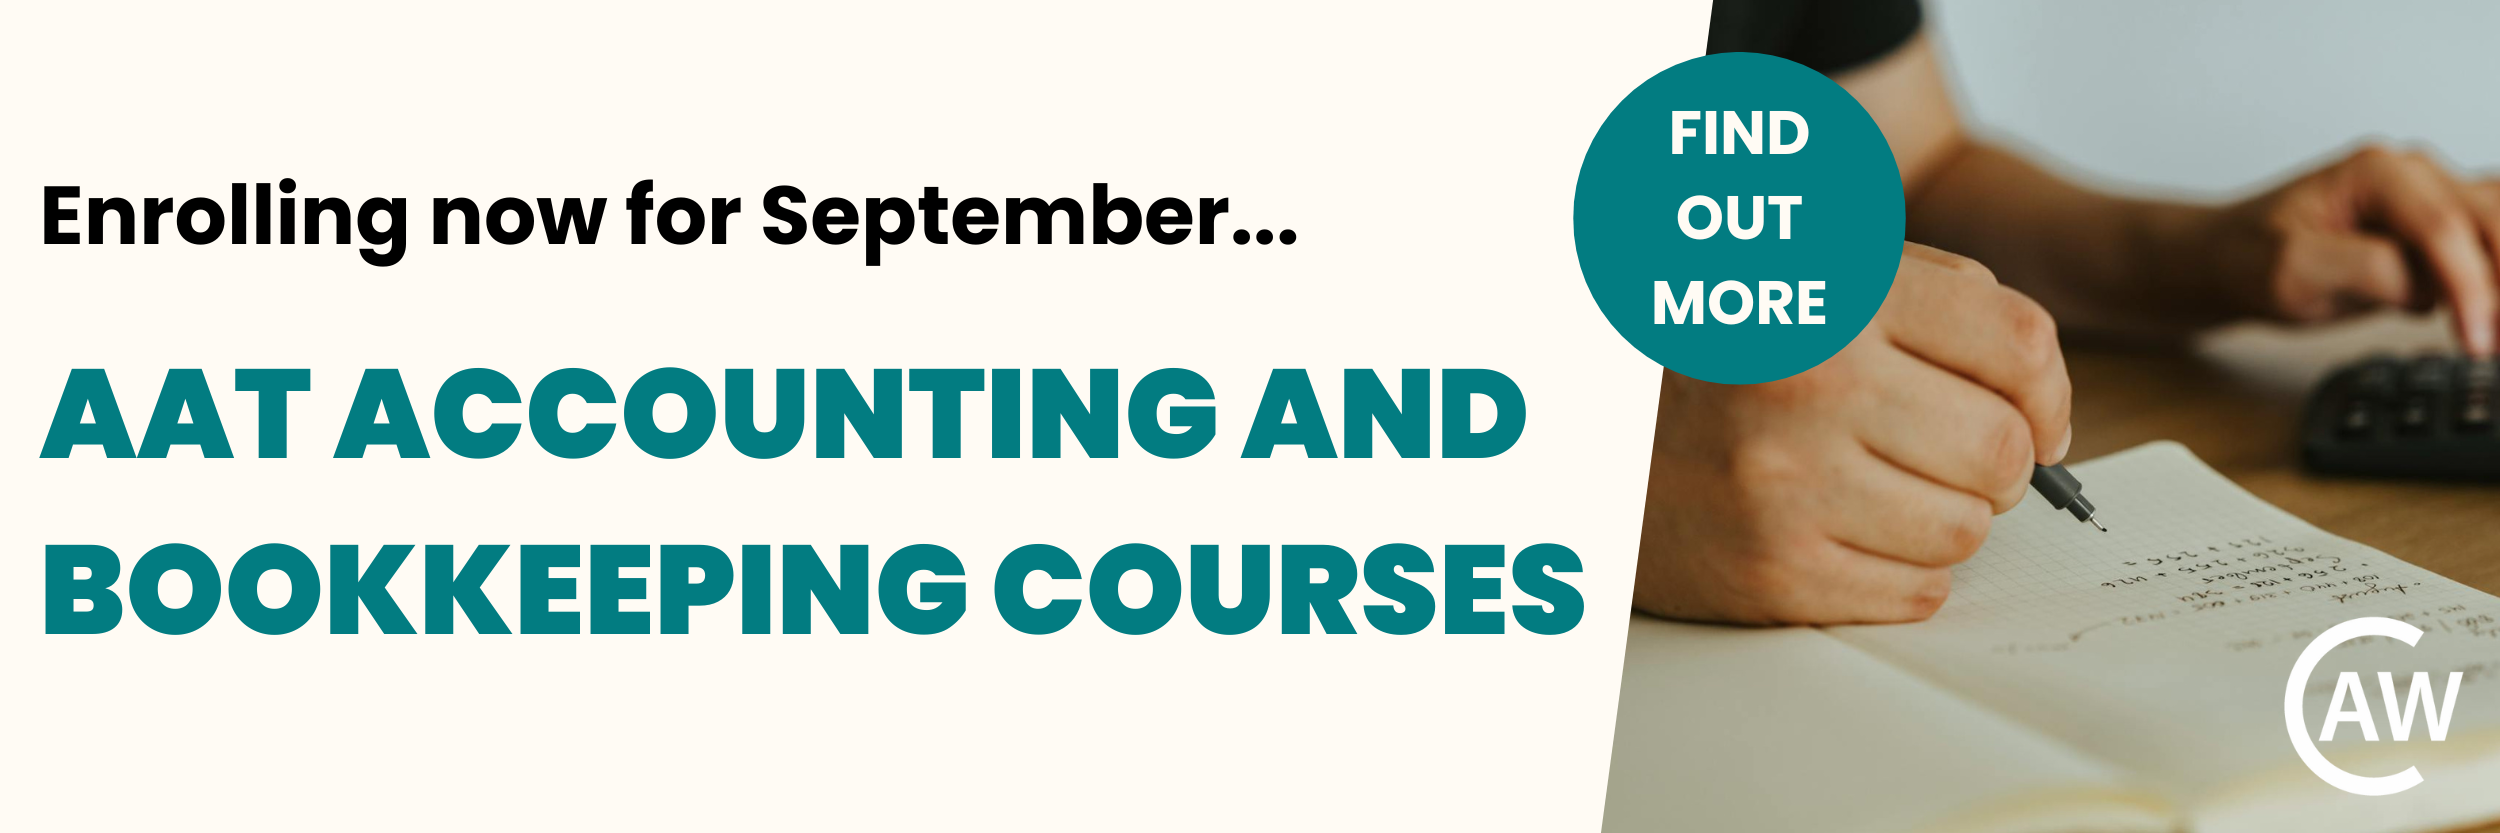 Accounting and Bookkeeping Courses at CAW Business School